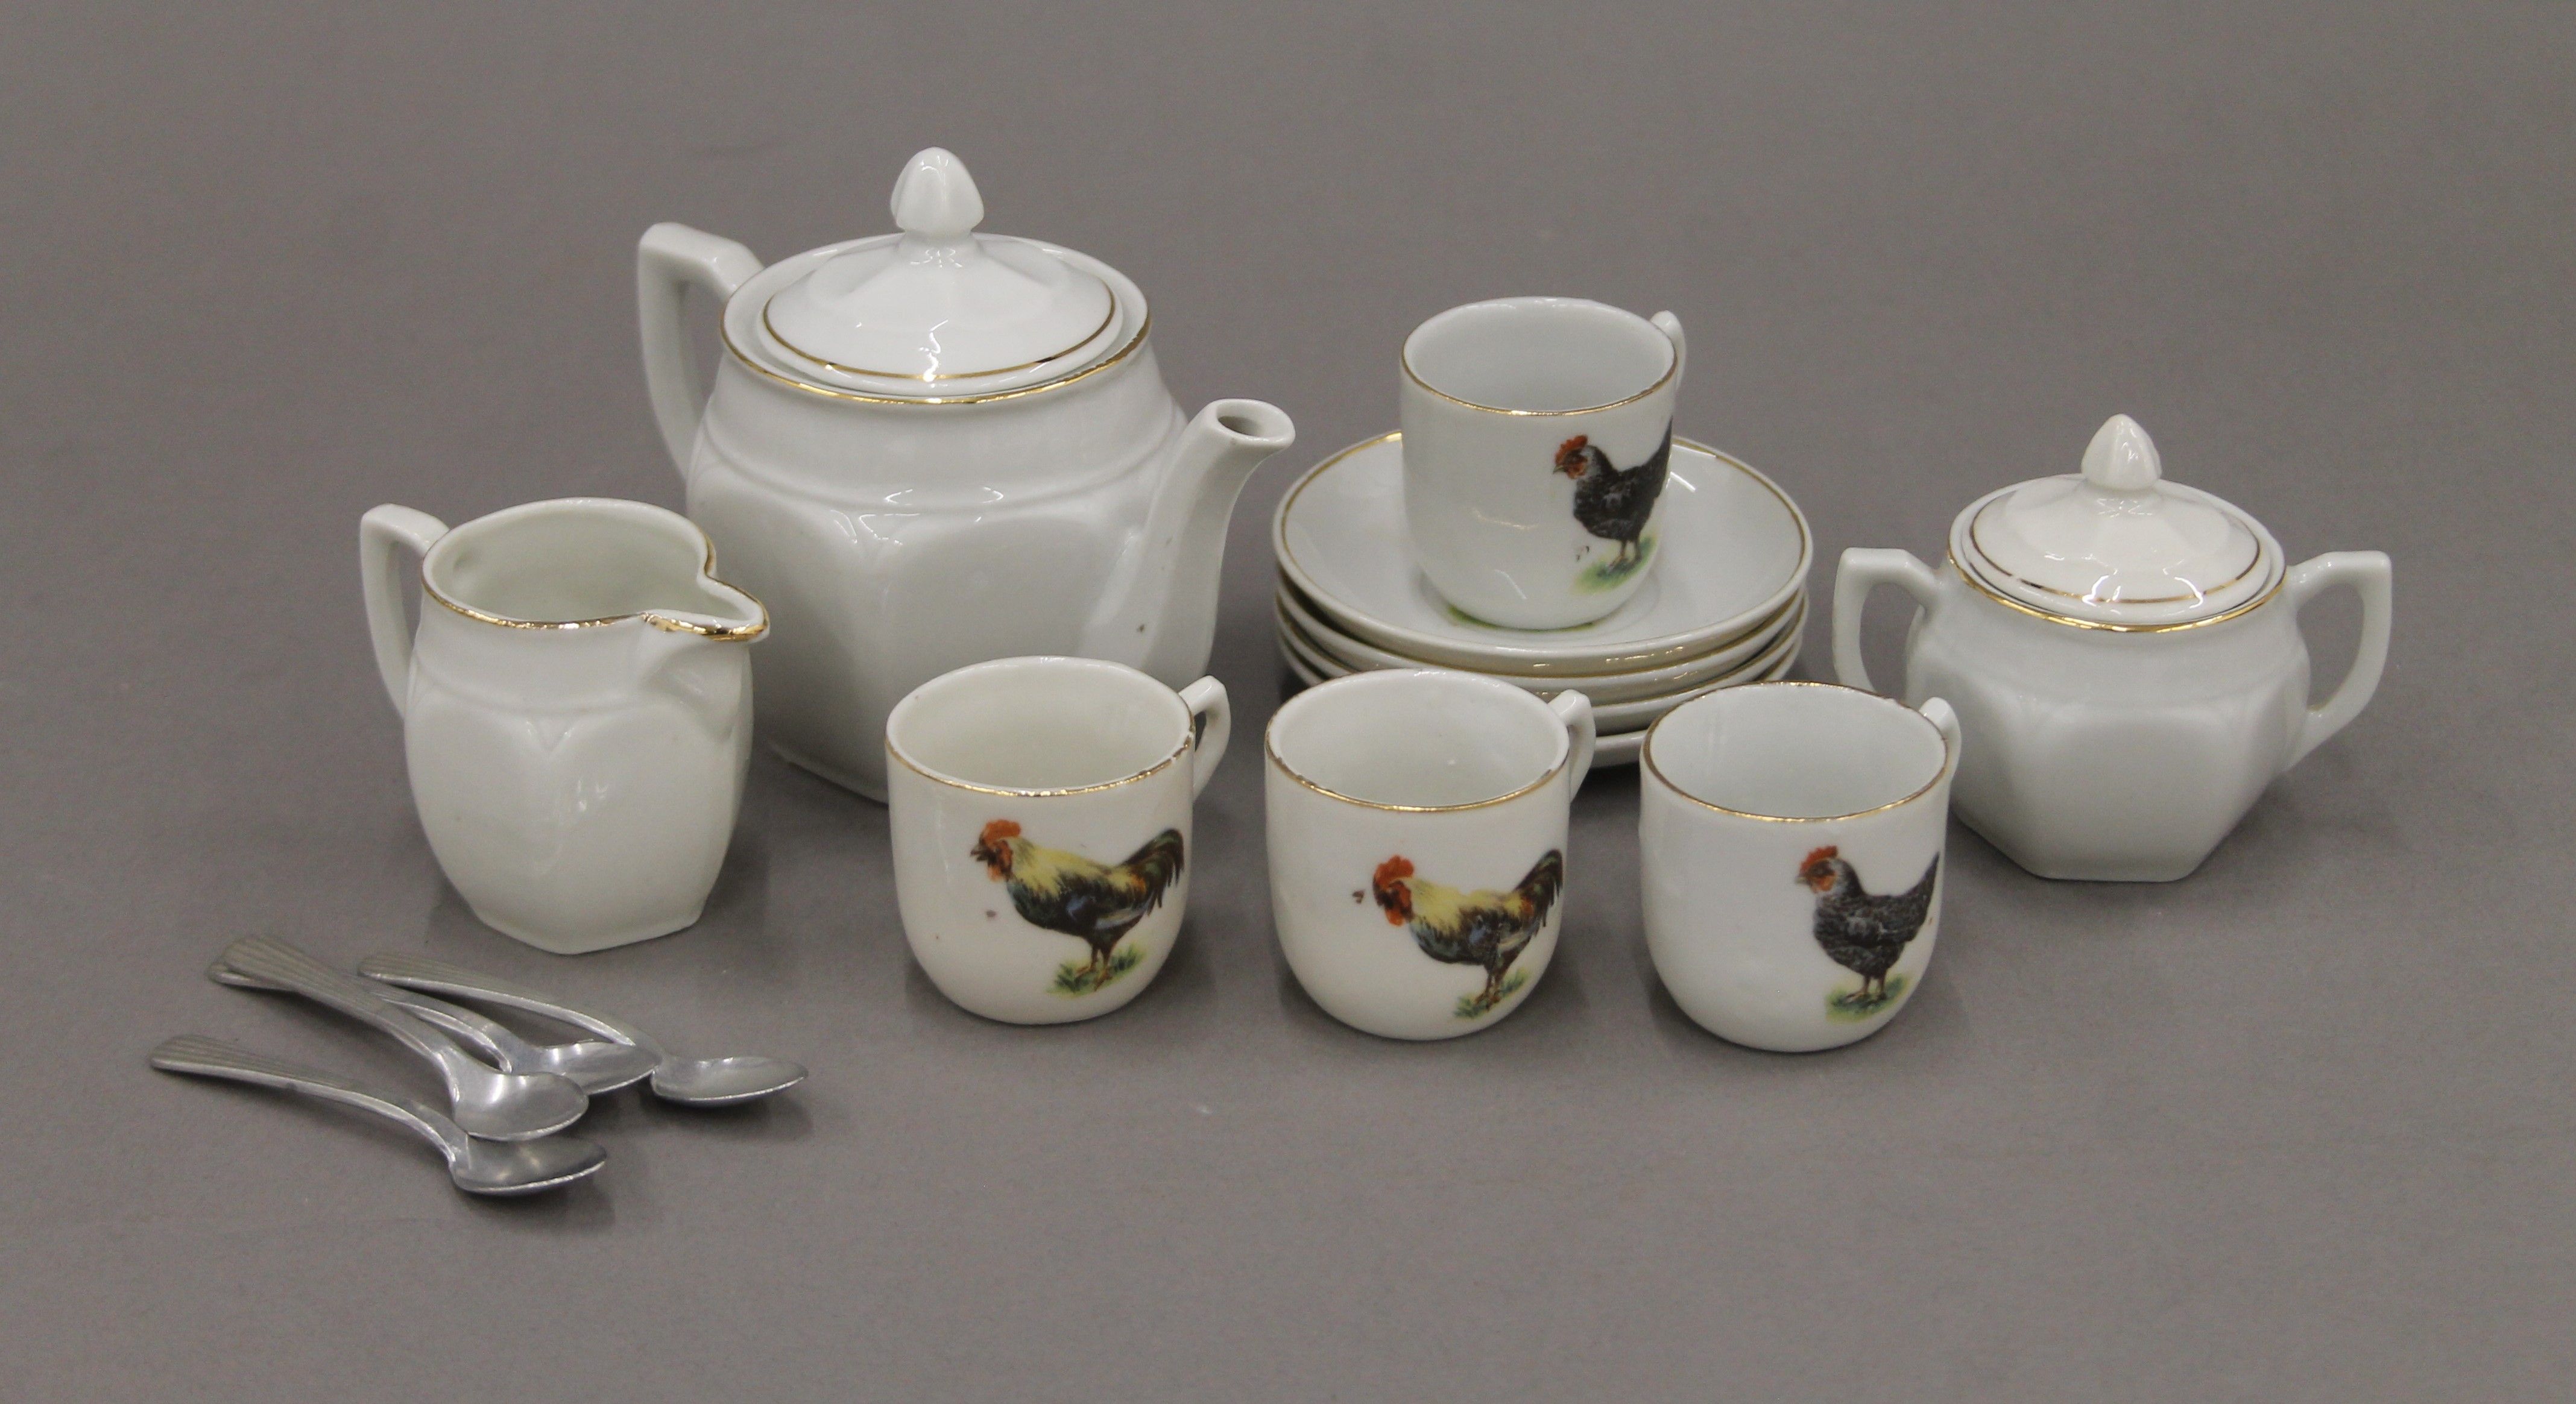 A child's tea set decorated with chickens and a quantity of small wooden animals. - Image 3 of 3